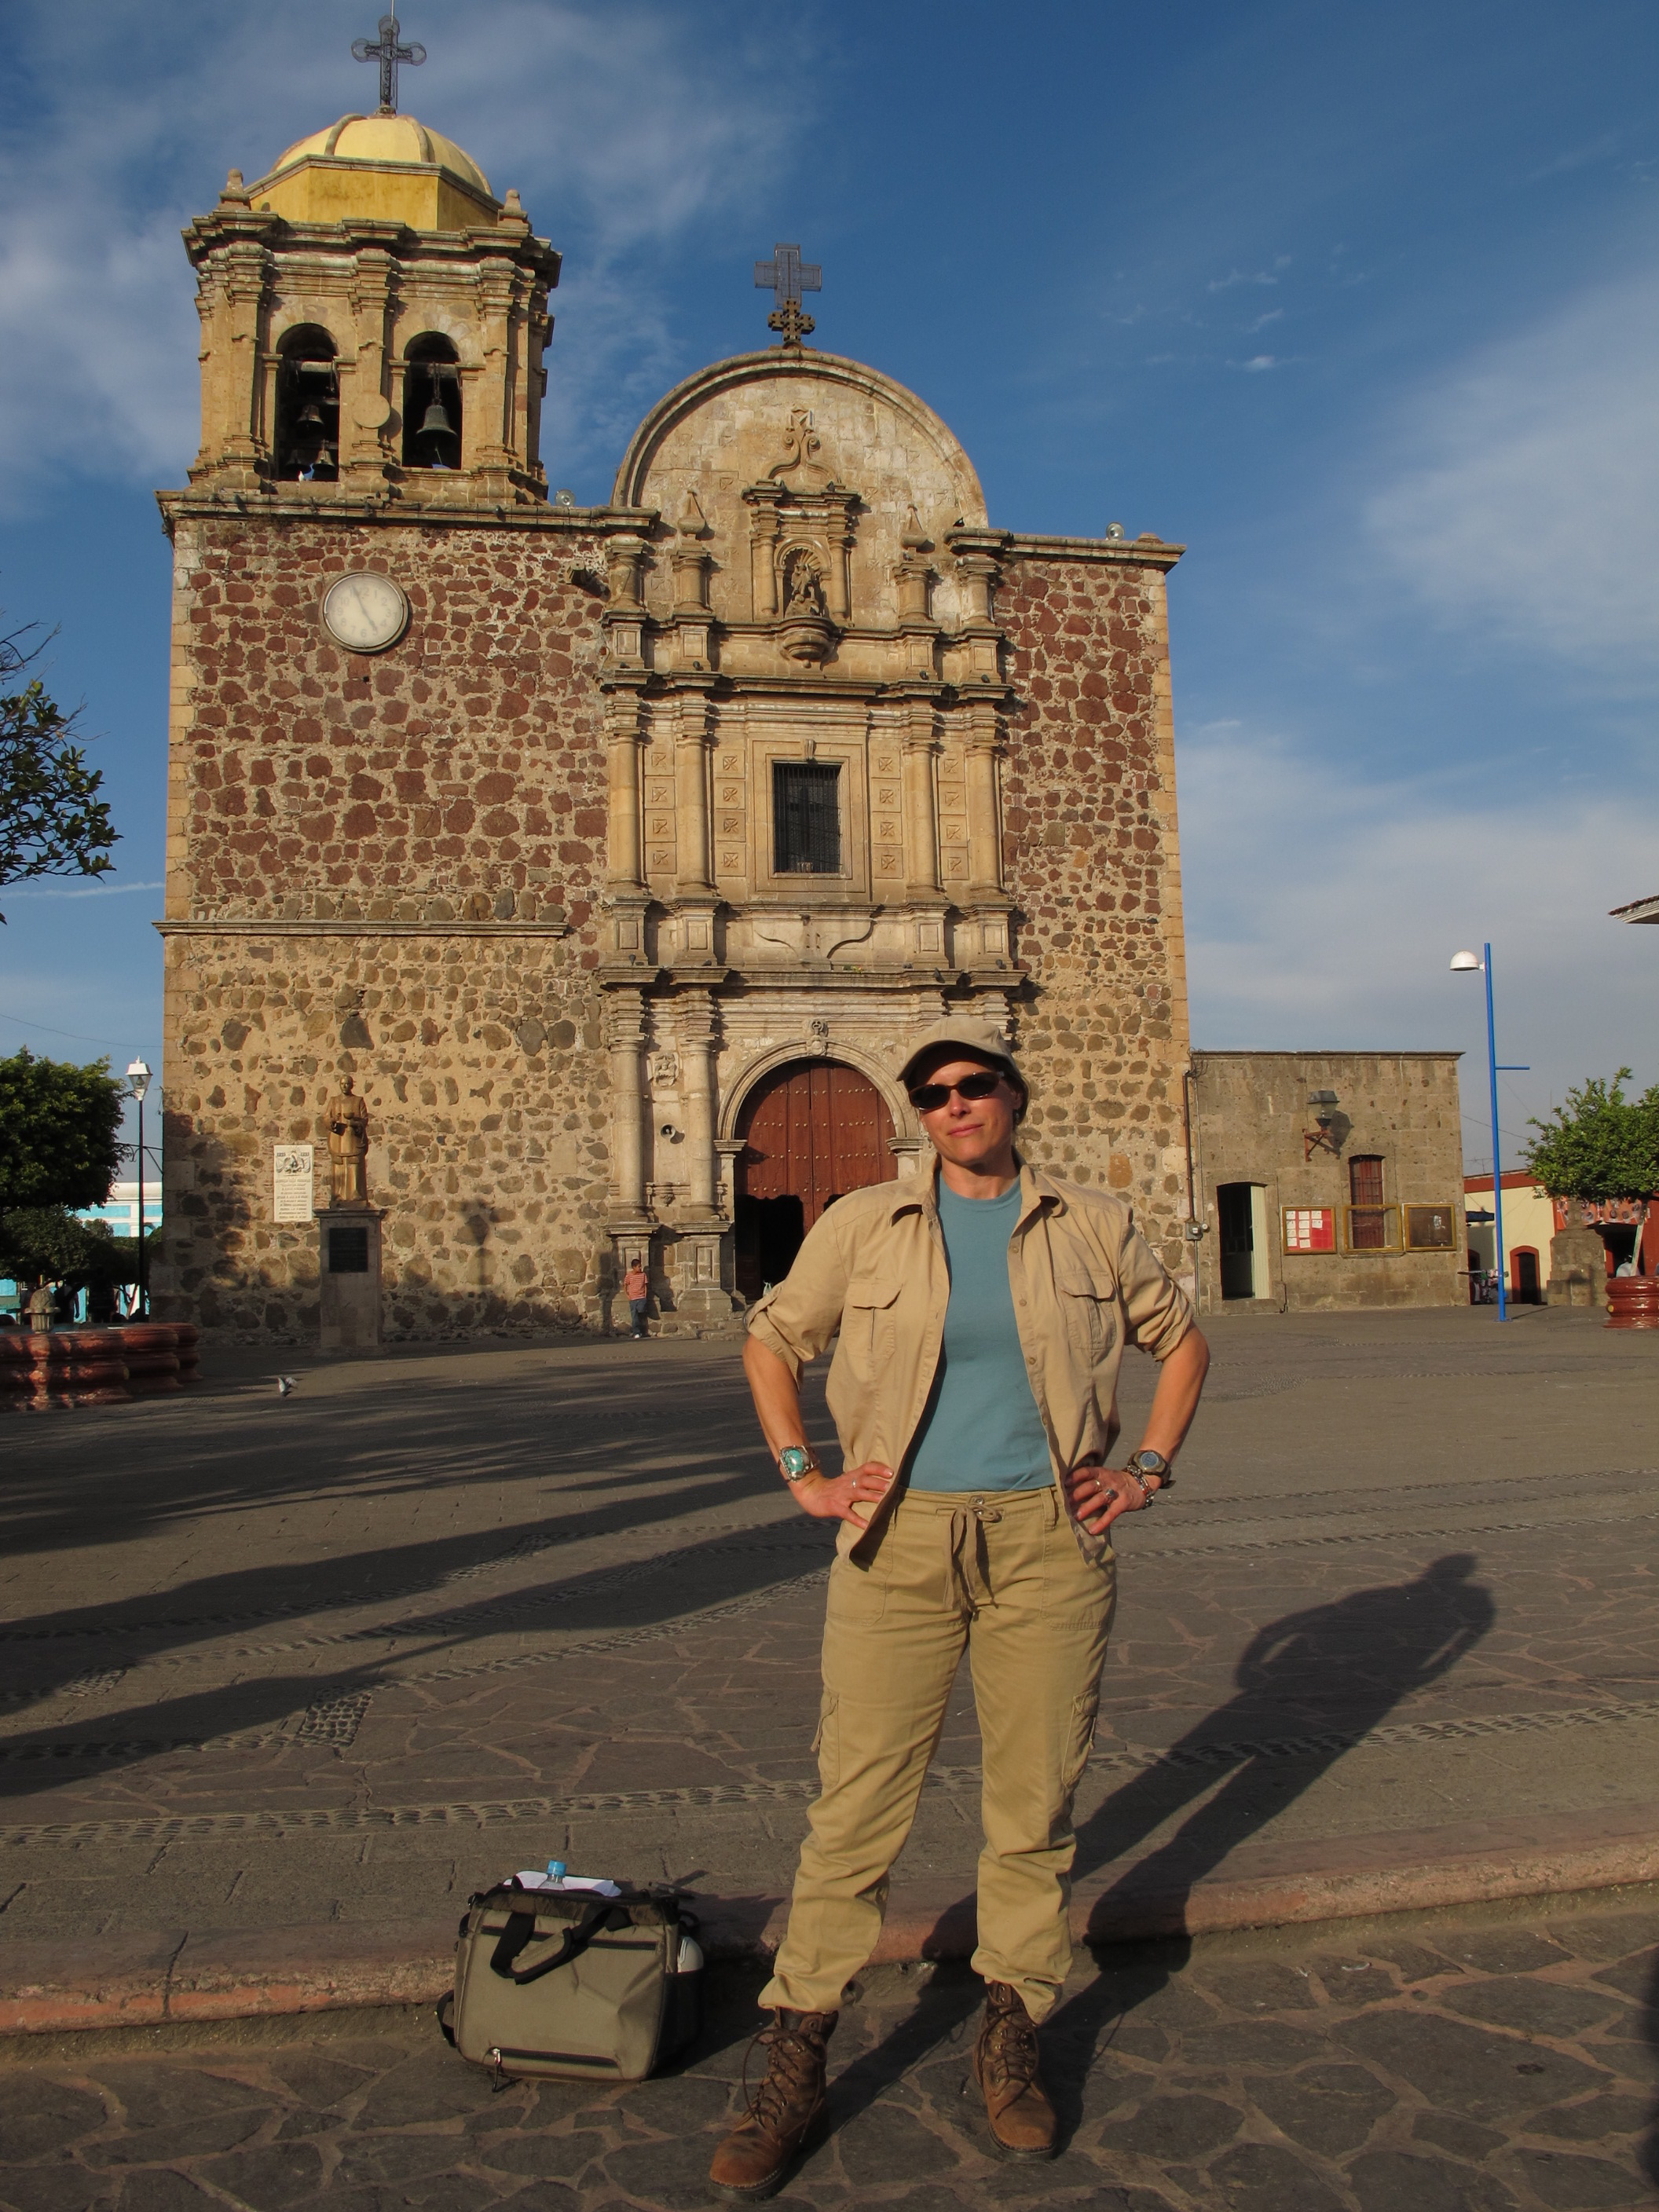 Church in Tequila , Mexico Jan. 2011